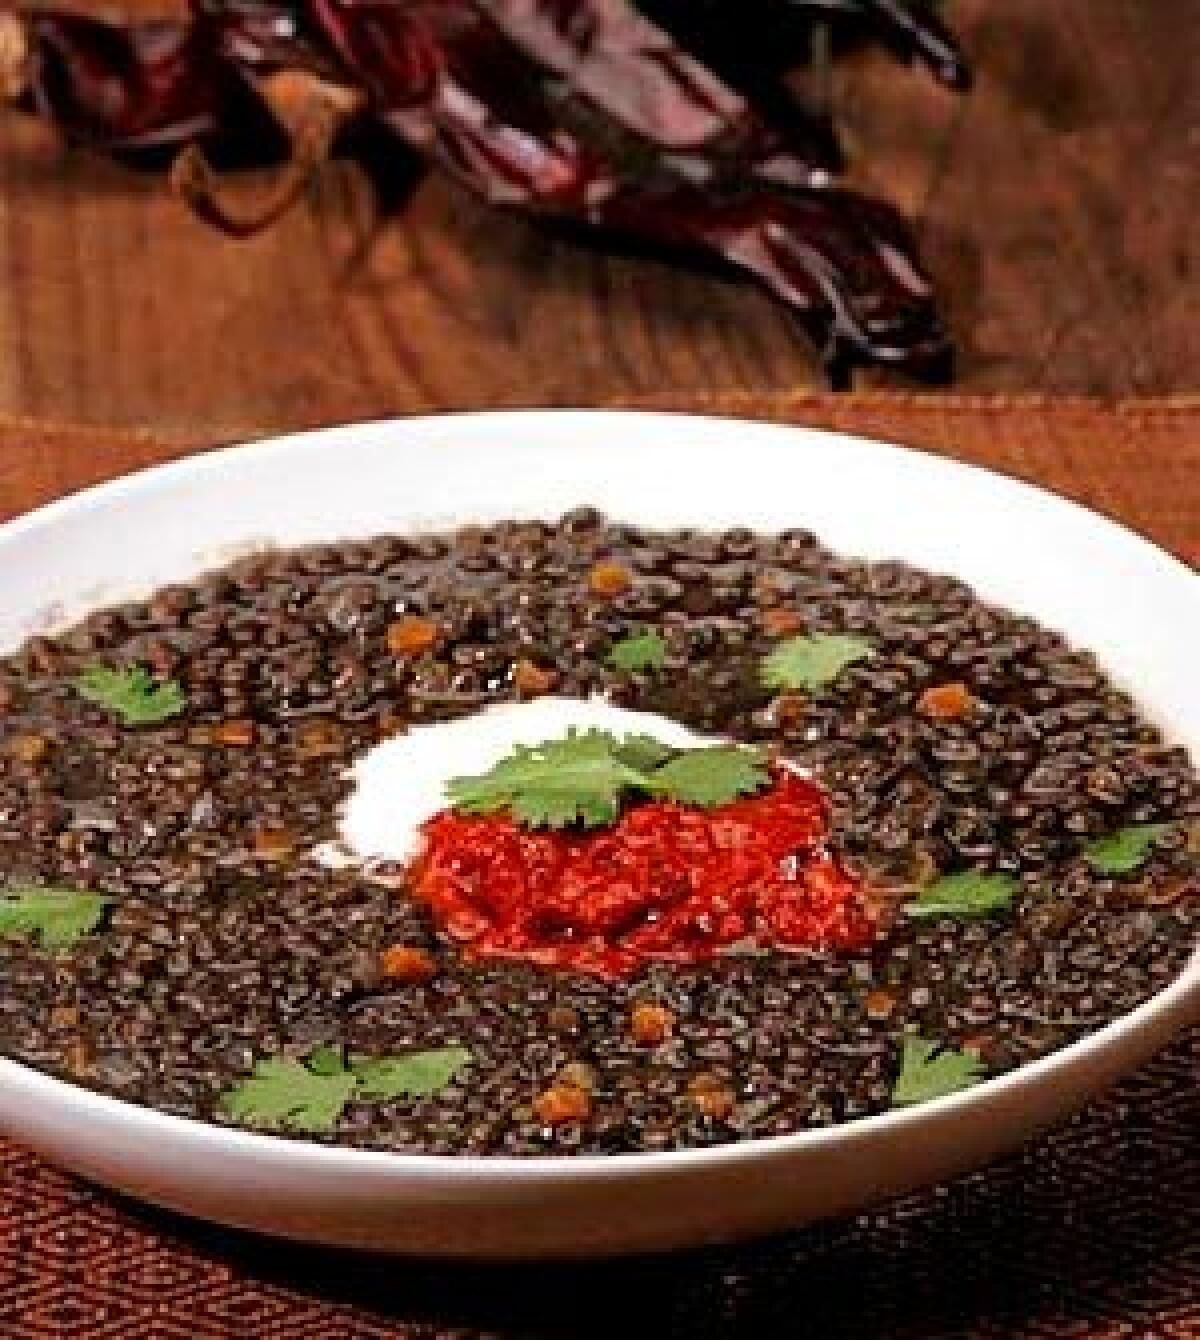 Swirled with yogurt into beluga lentil soup, a tomato-pepper harissa adds spice and depth.